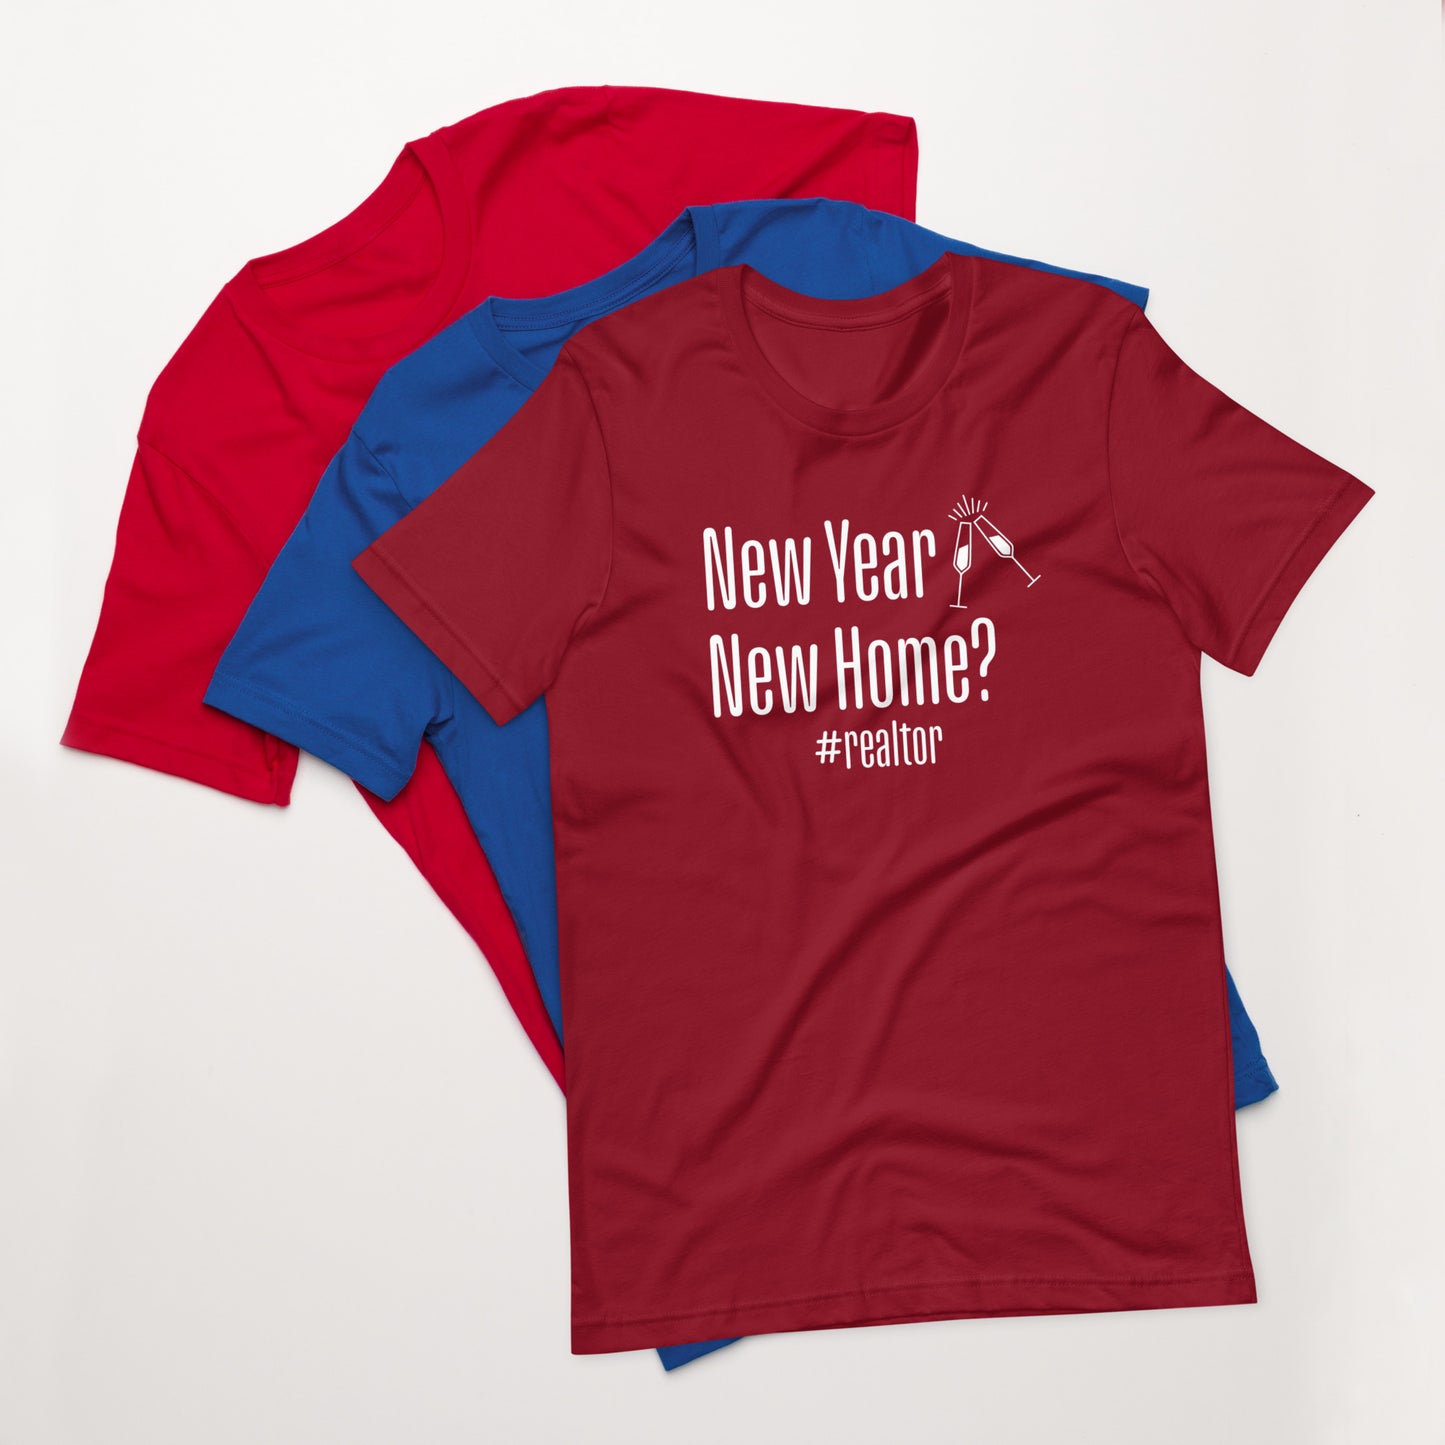 Unisex t-shirt "New Year, New Home?"